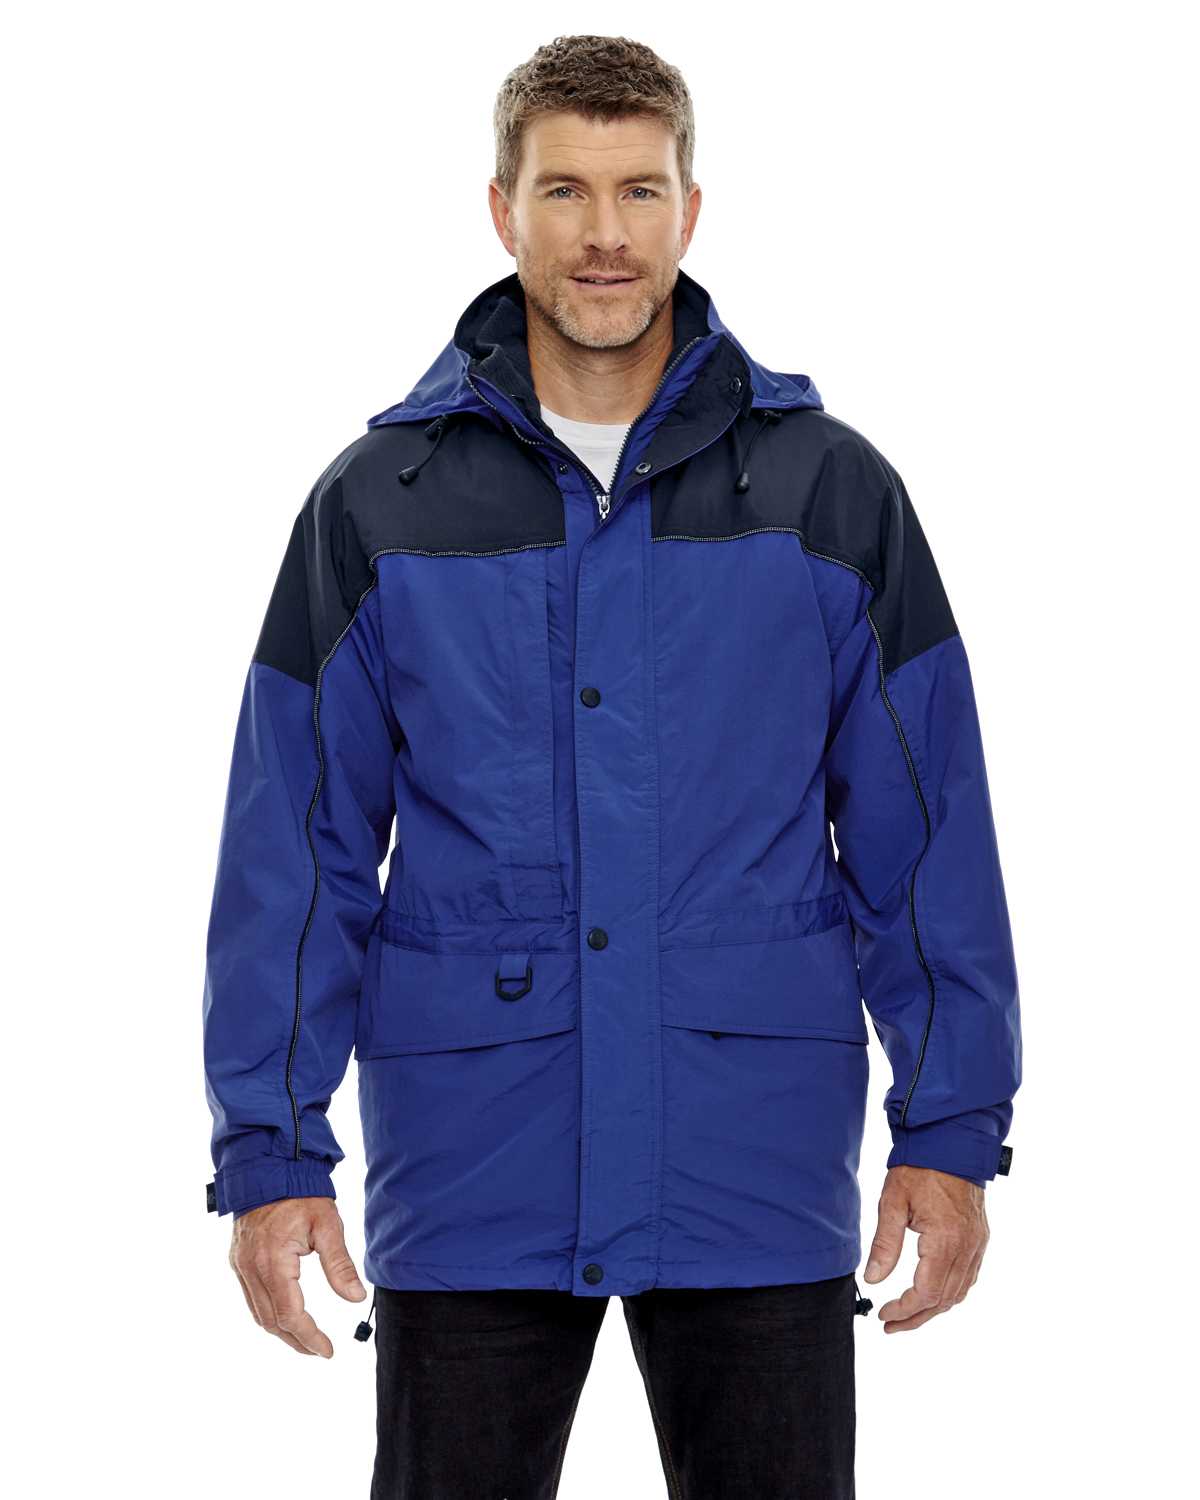 North End 88006 Adult 3-in-1 Two-Tone Parka | ApparelChoice.com